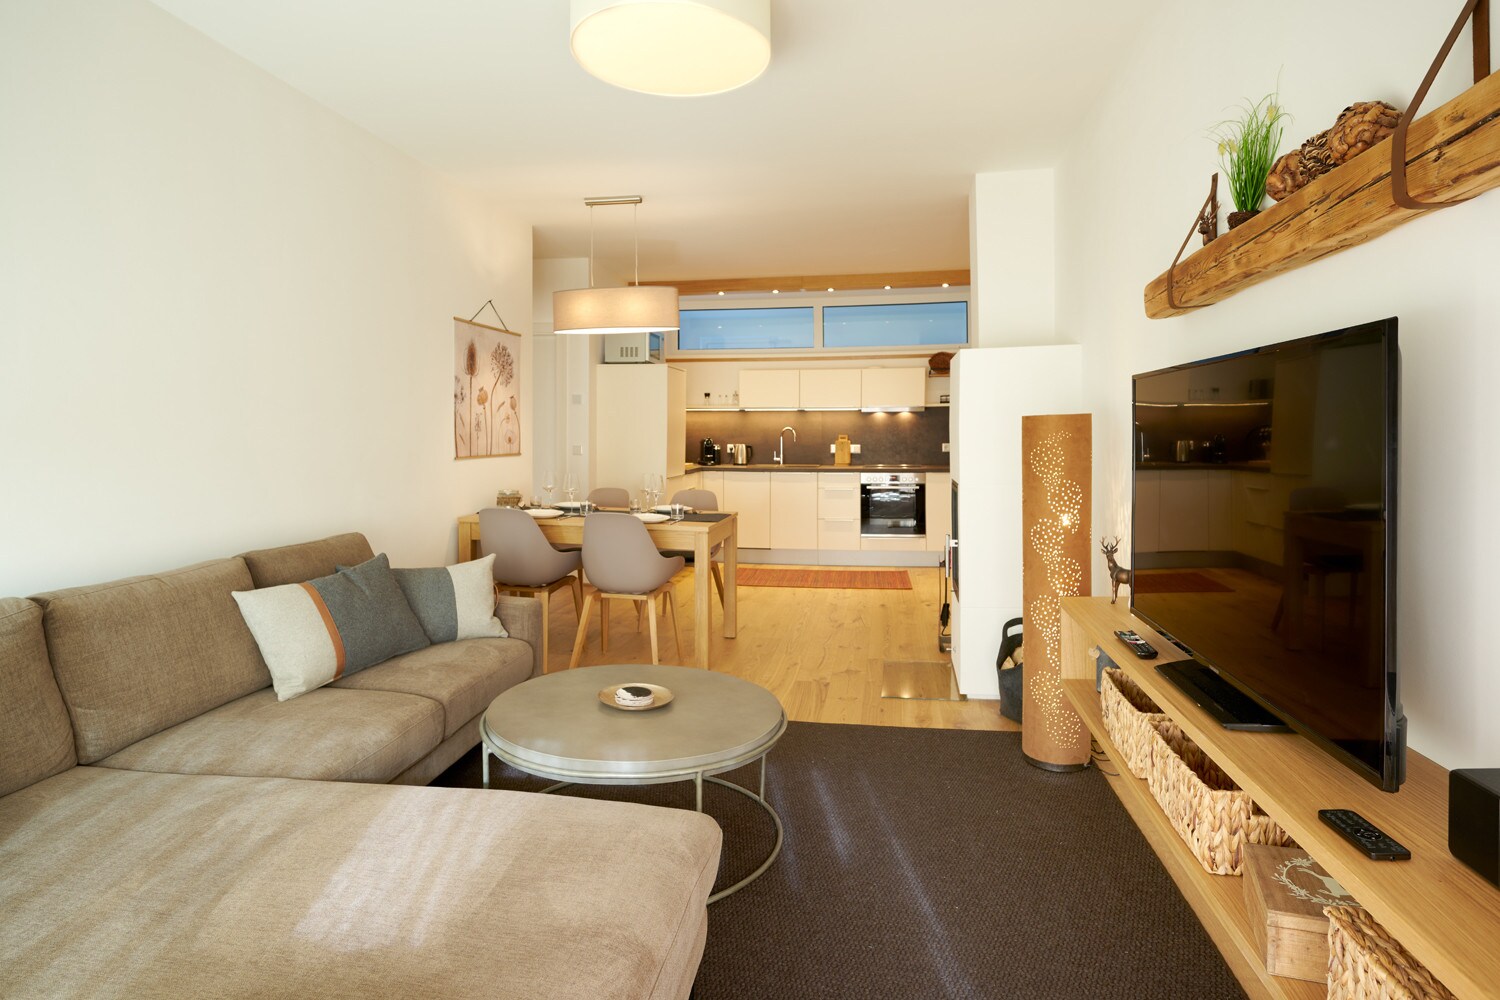 Property Image 1 - Striking Modern Apartment close to Many Attractions
